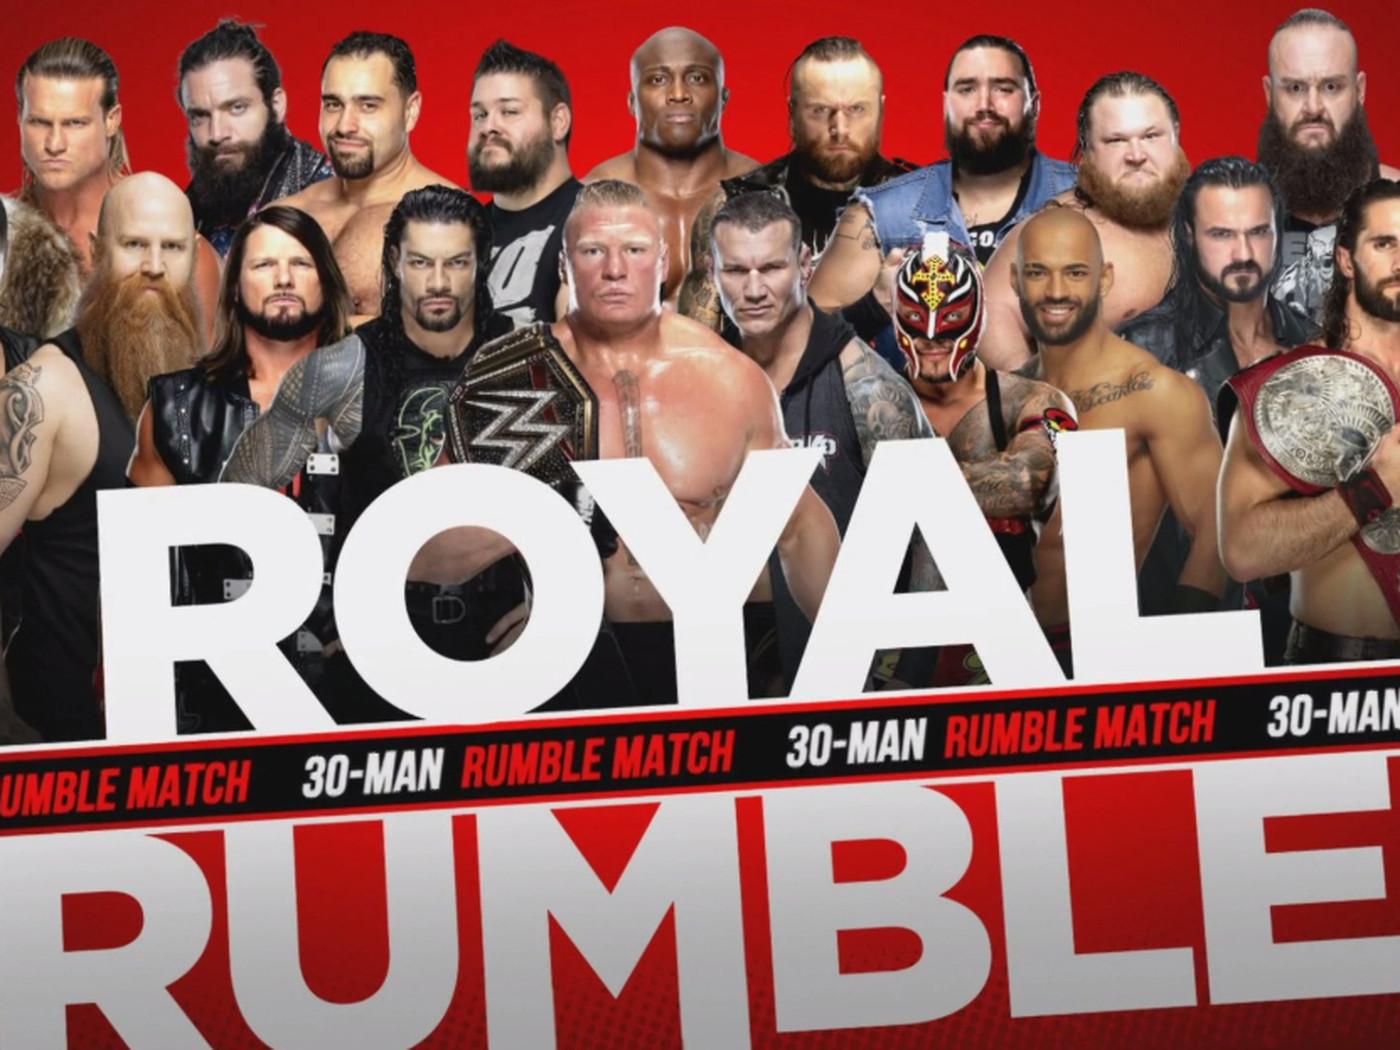 Updated list of confirmed entrants in the Royal Rumble